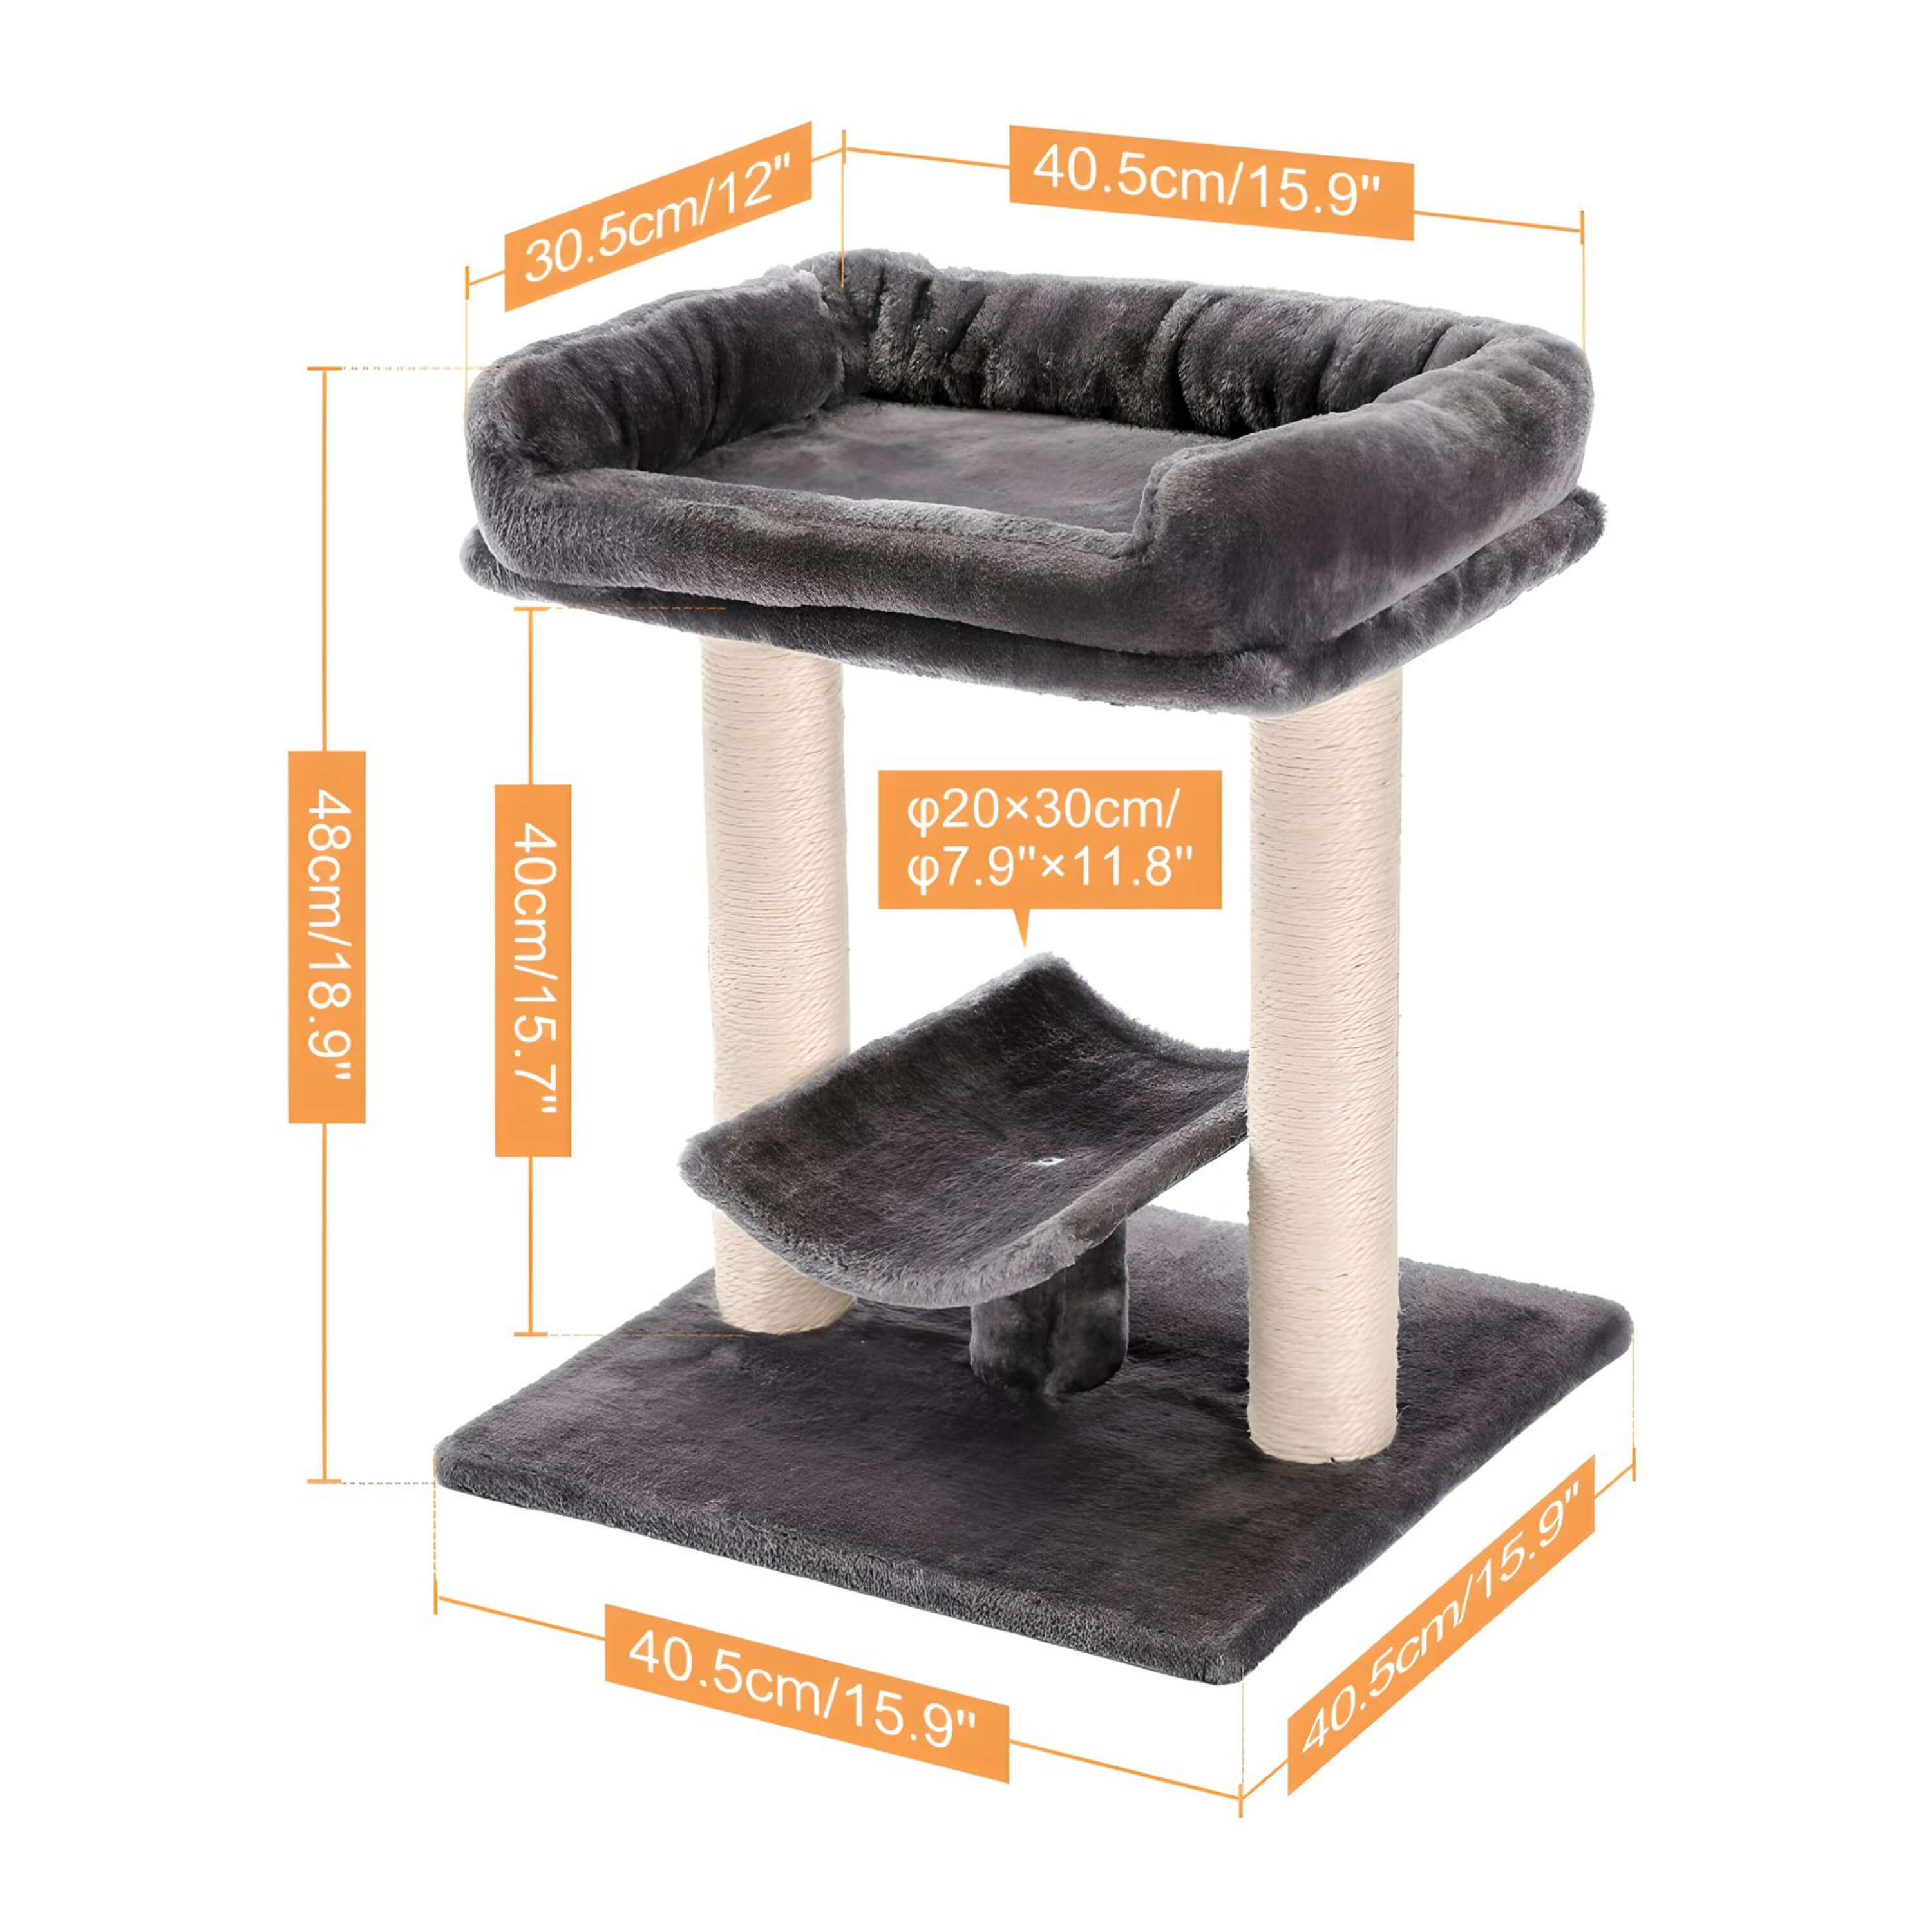 dimensions-of-2-tier-cat-tower